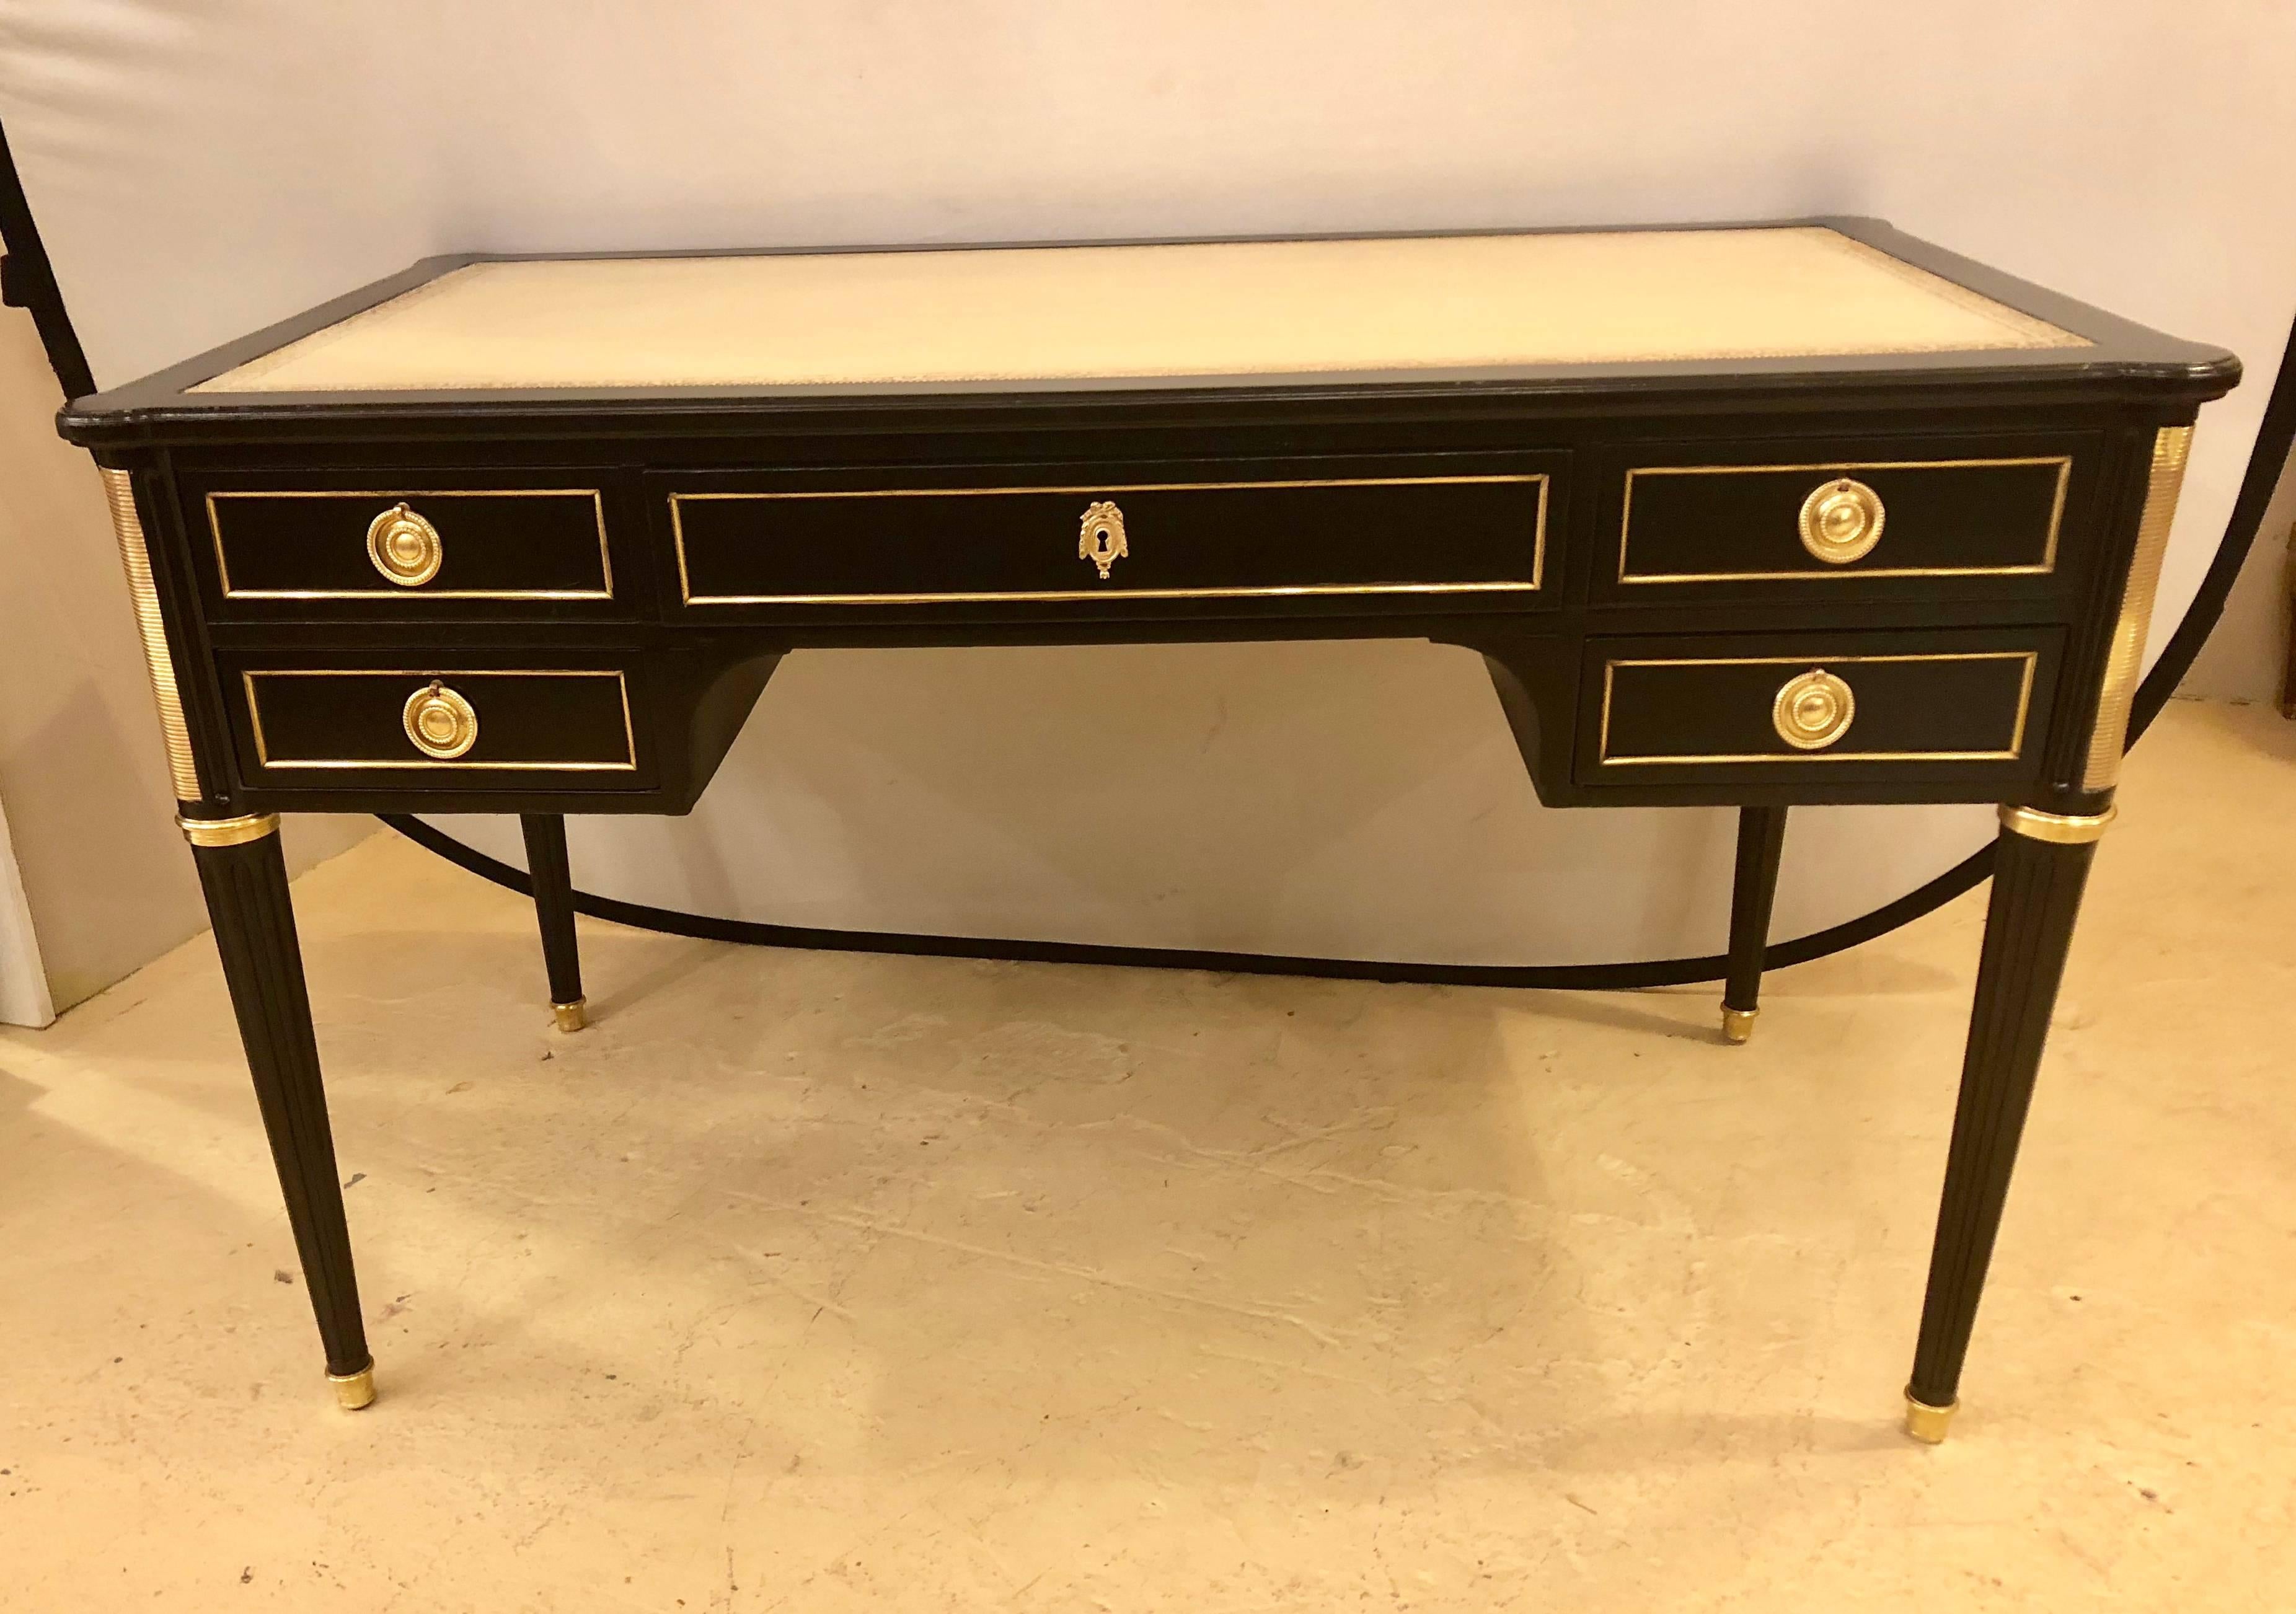 A Jansen style Hollywood Regency bronze-mounted ebony desk in Louis XVI fashion. Having all the earmarks of the Maison Jansen flair this fine bronze-mounted desk sits on bronze casters with reeded and tapering legs terminating in bronze capitals